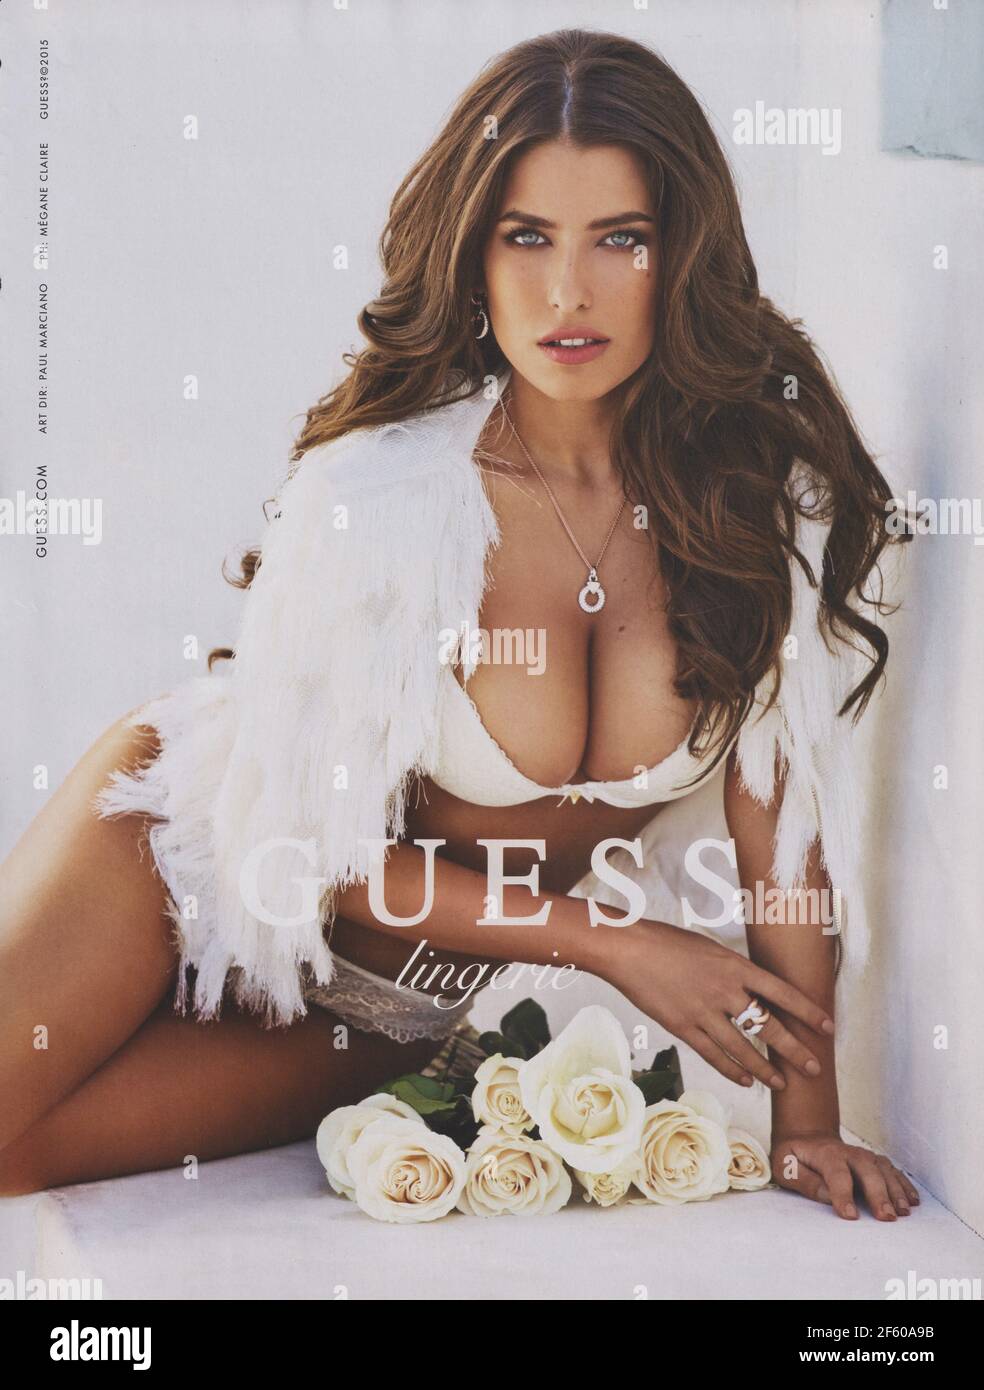 poster advertising GUESS in paper magazine from 2015 year, advertisement, creative GUESS advert from 2010s Stock Photo